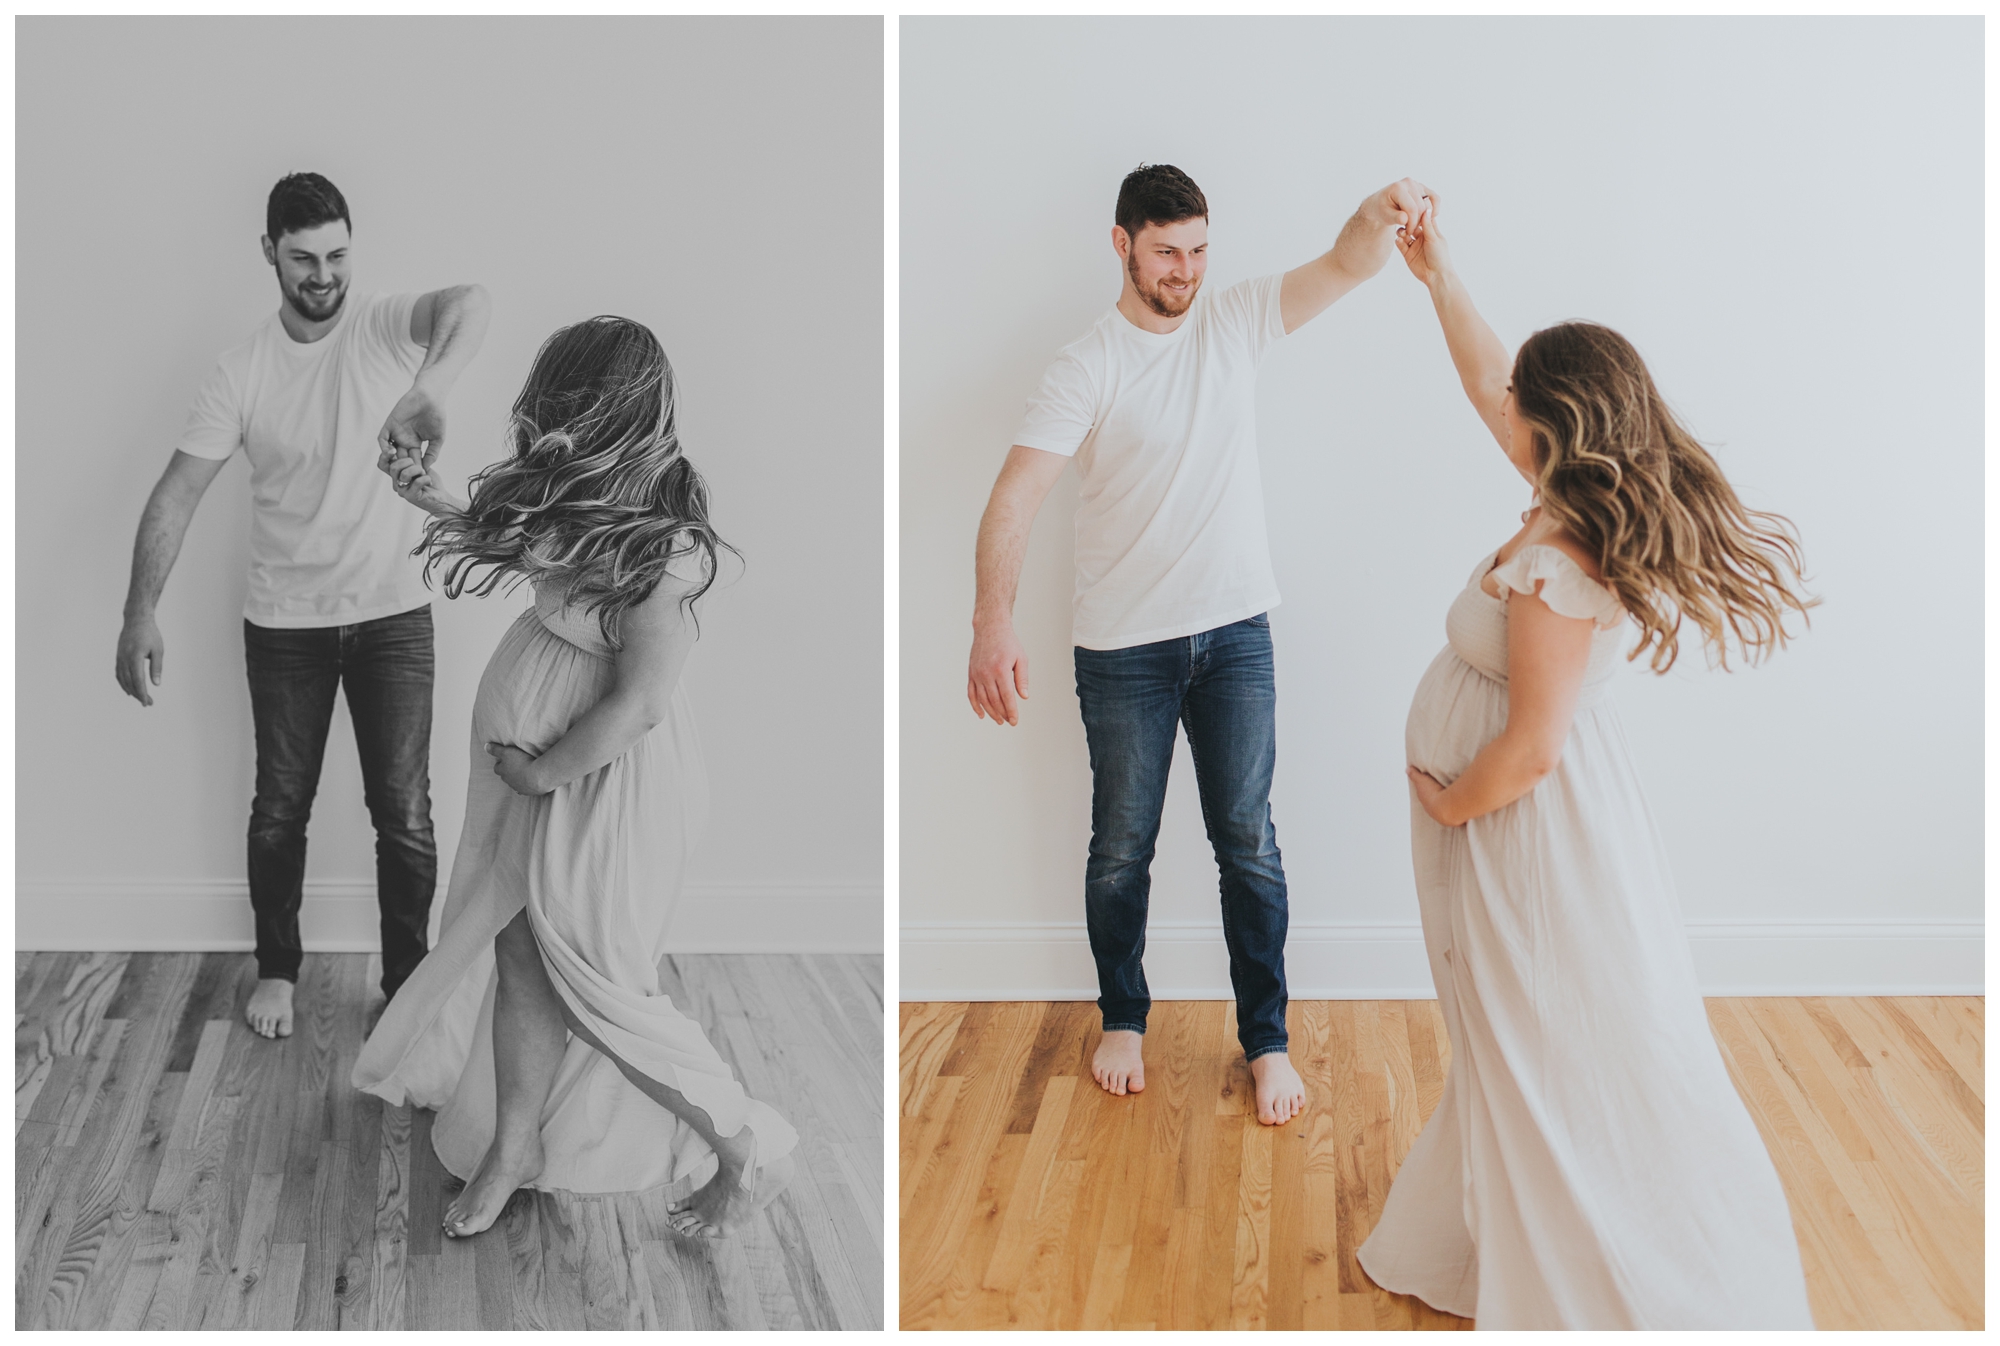 photography studios for maternity session Chicago; Chicago maternity photographer